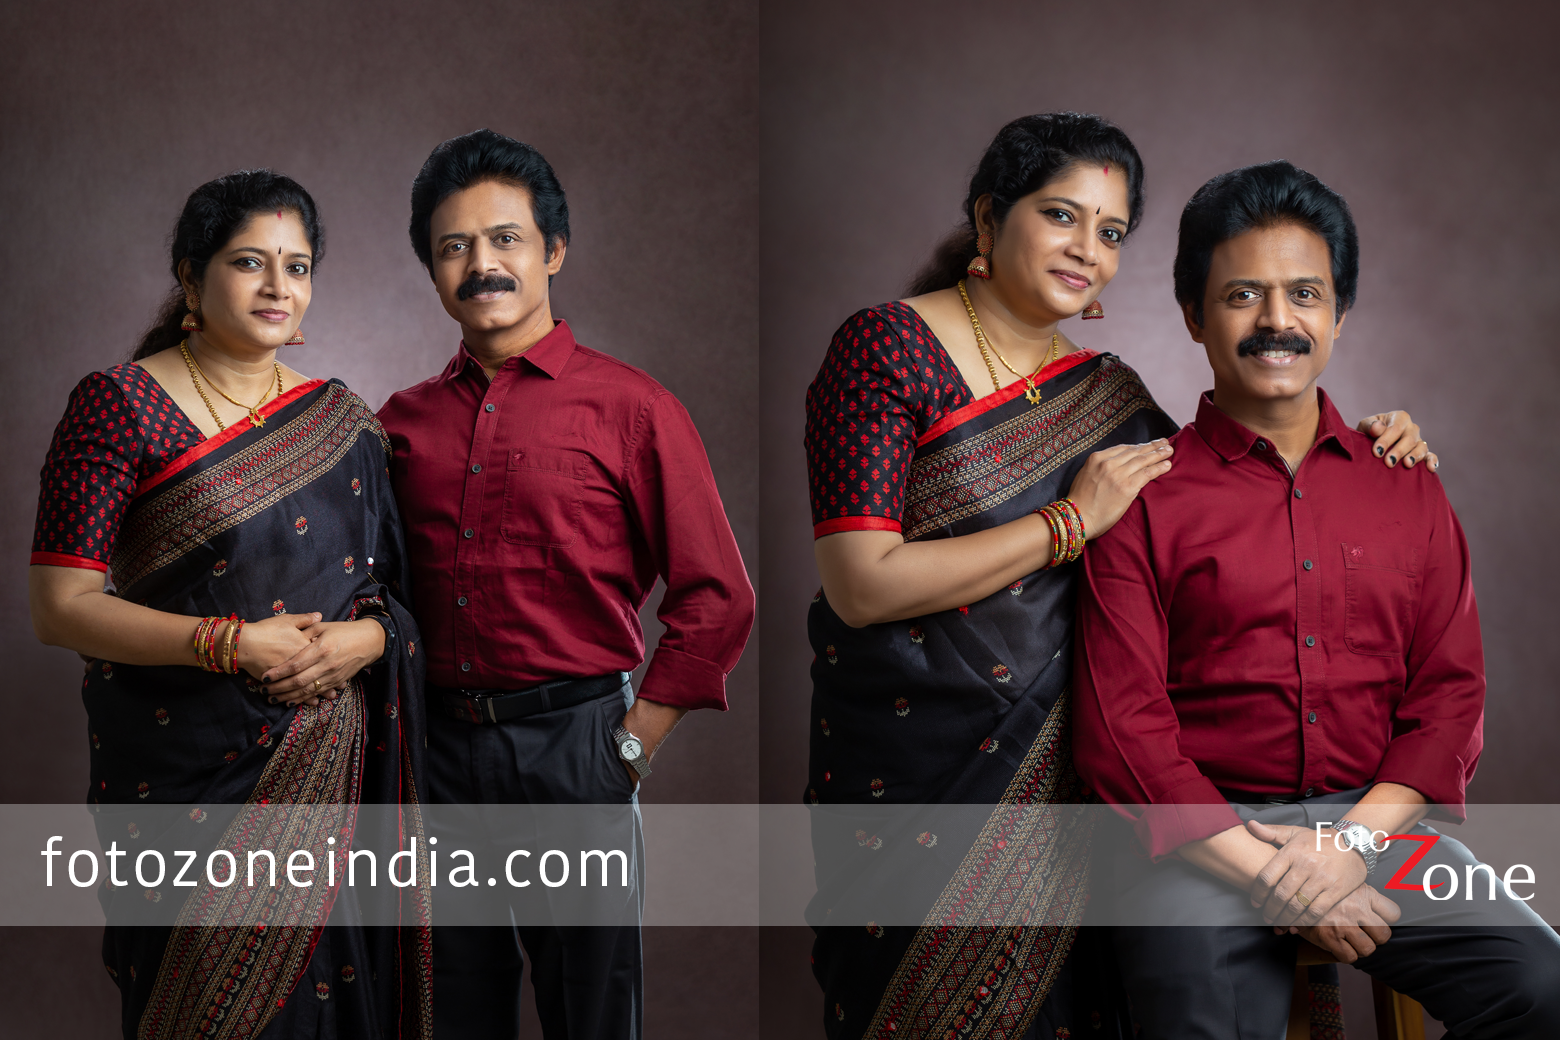 What are some good poses for couple photography? - Quora